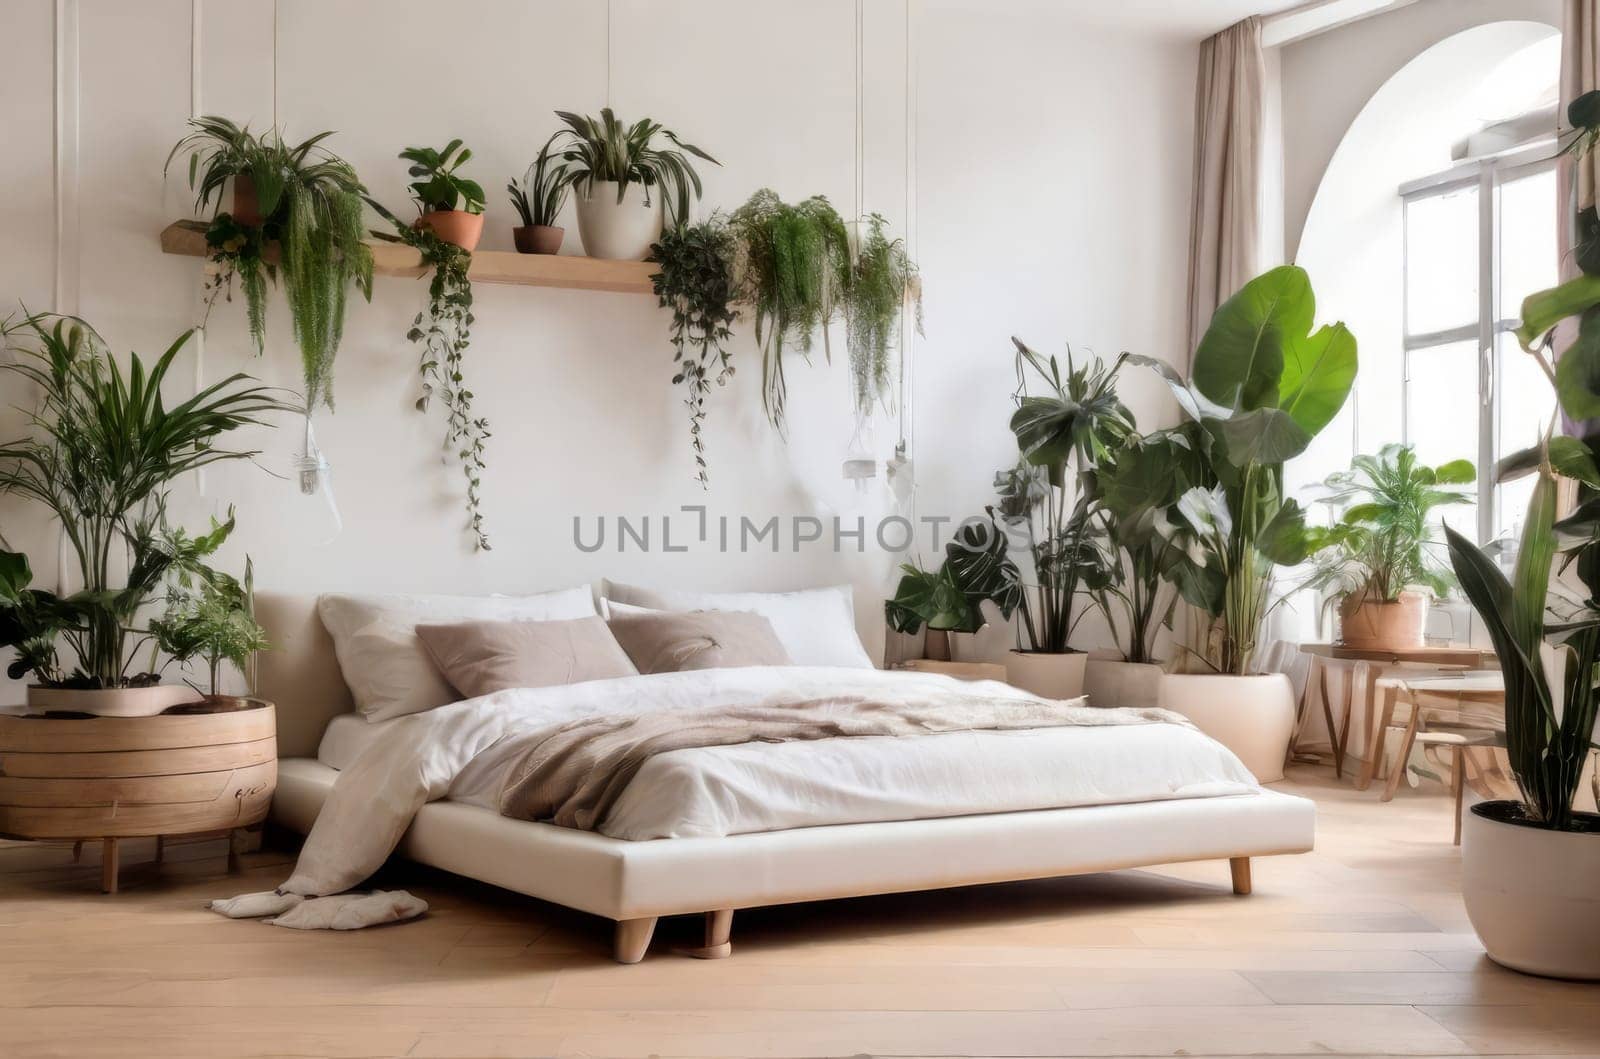 Comfortable ambiance in a home garden, bedroom in white and wooden design. Close-up: bed, stylish parquet, and a wealth of indoor plants. Interior with urban jungle elements. Biophilia concept